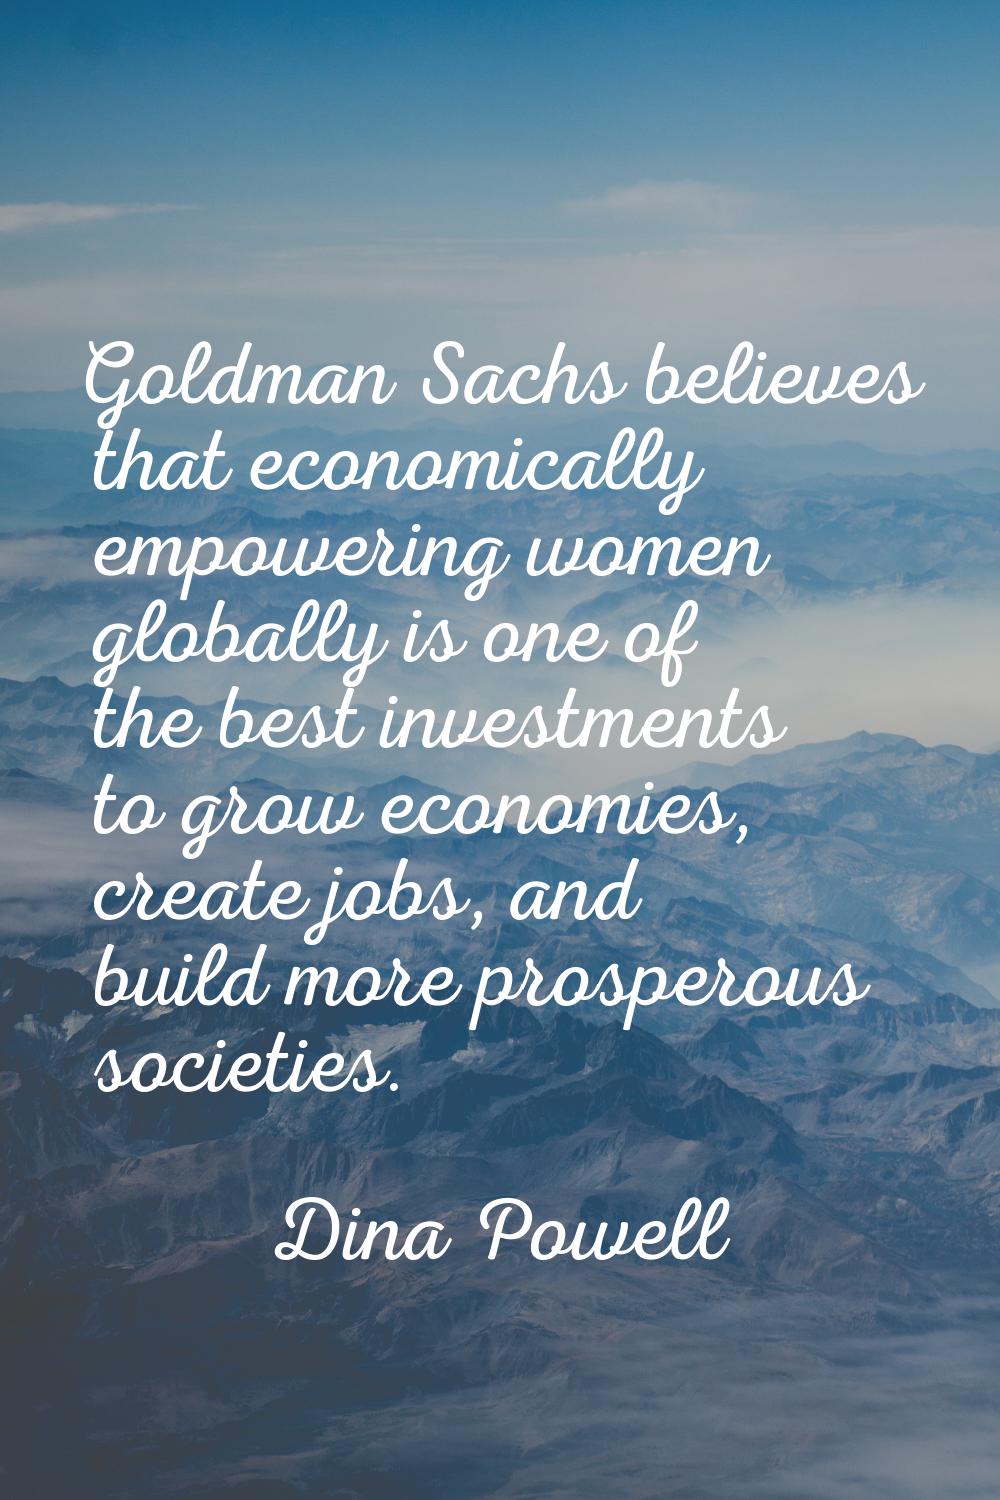 Goldman Sachs believes that economically empowering women globally is one of the best investments t